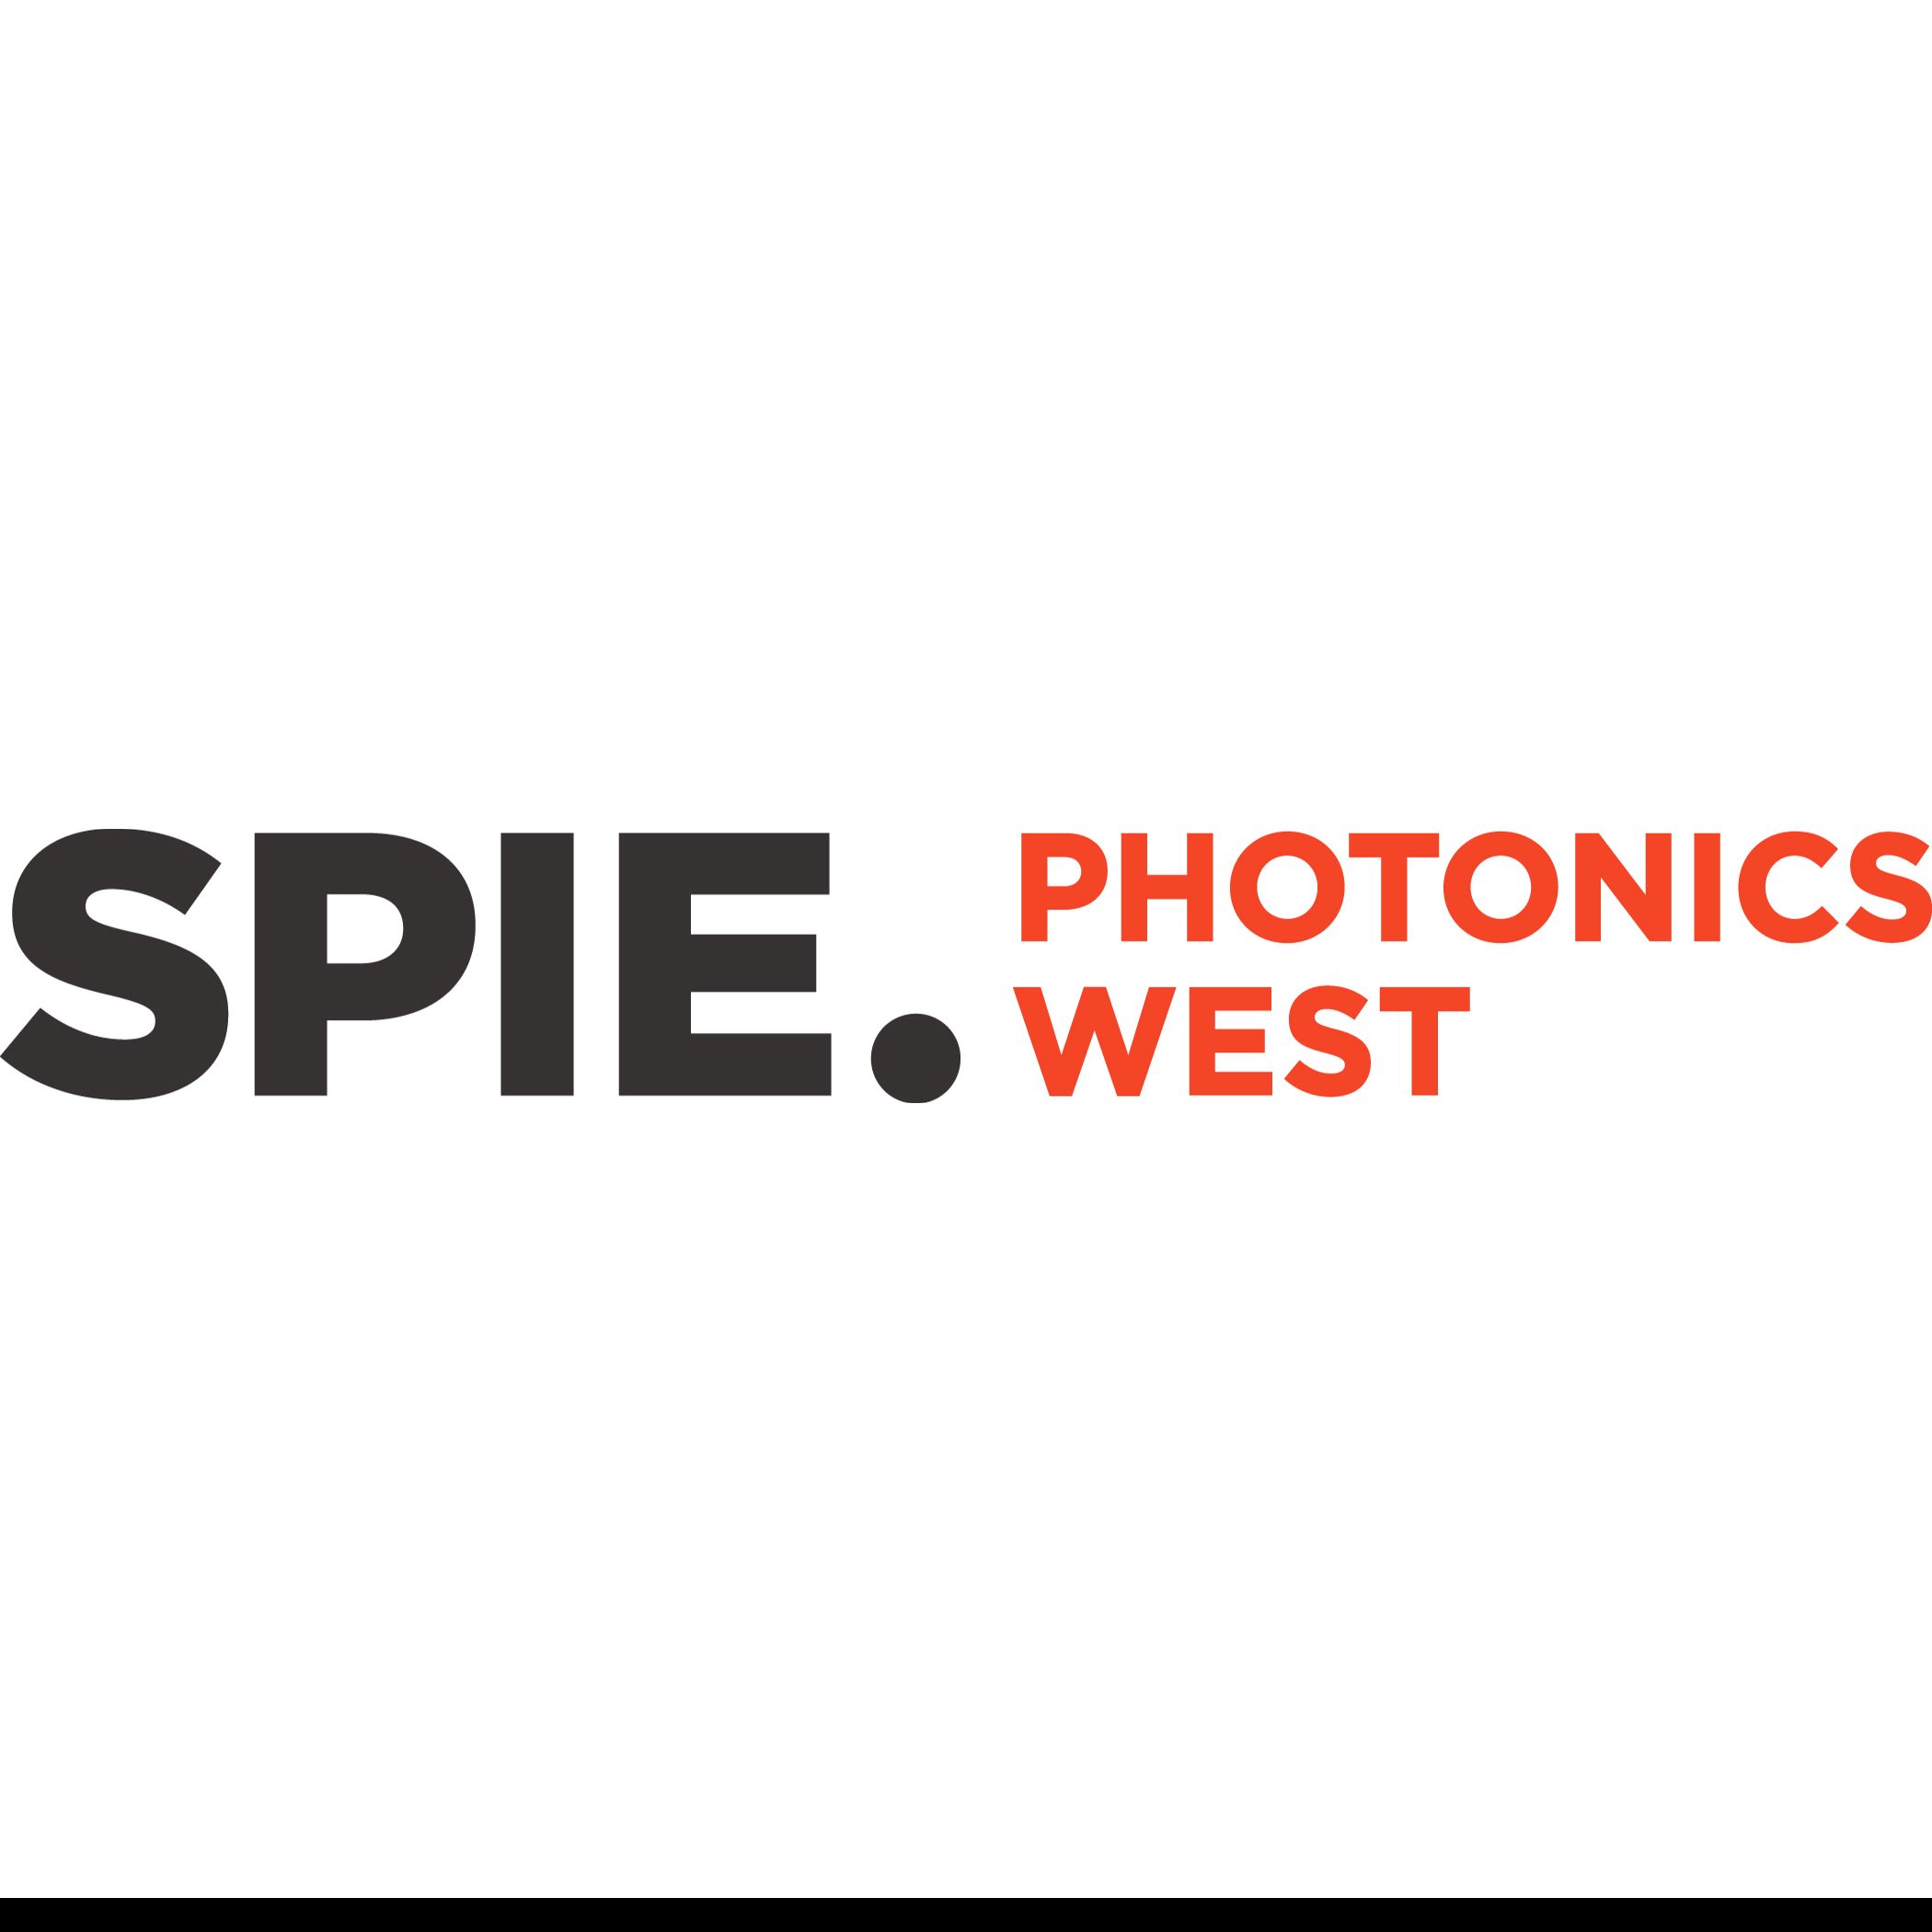 LASEA exhibits at Photonics West 2022 – booth #4517